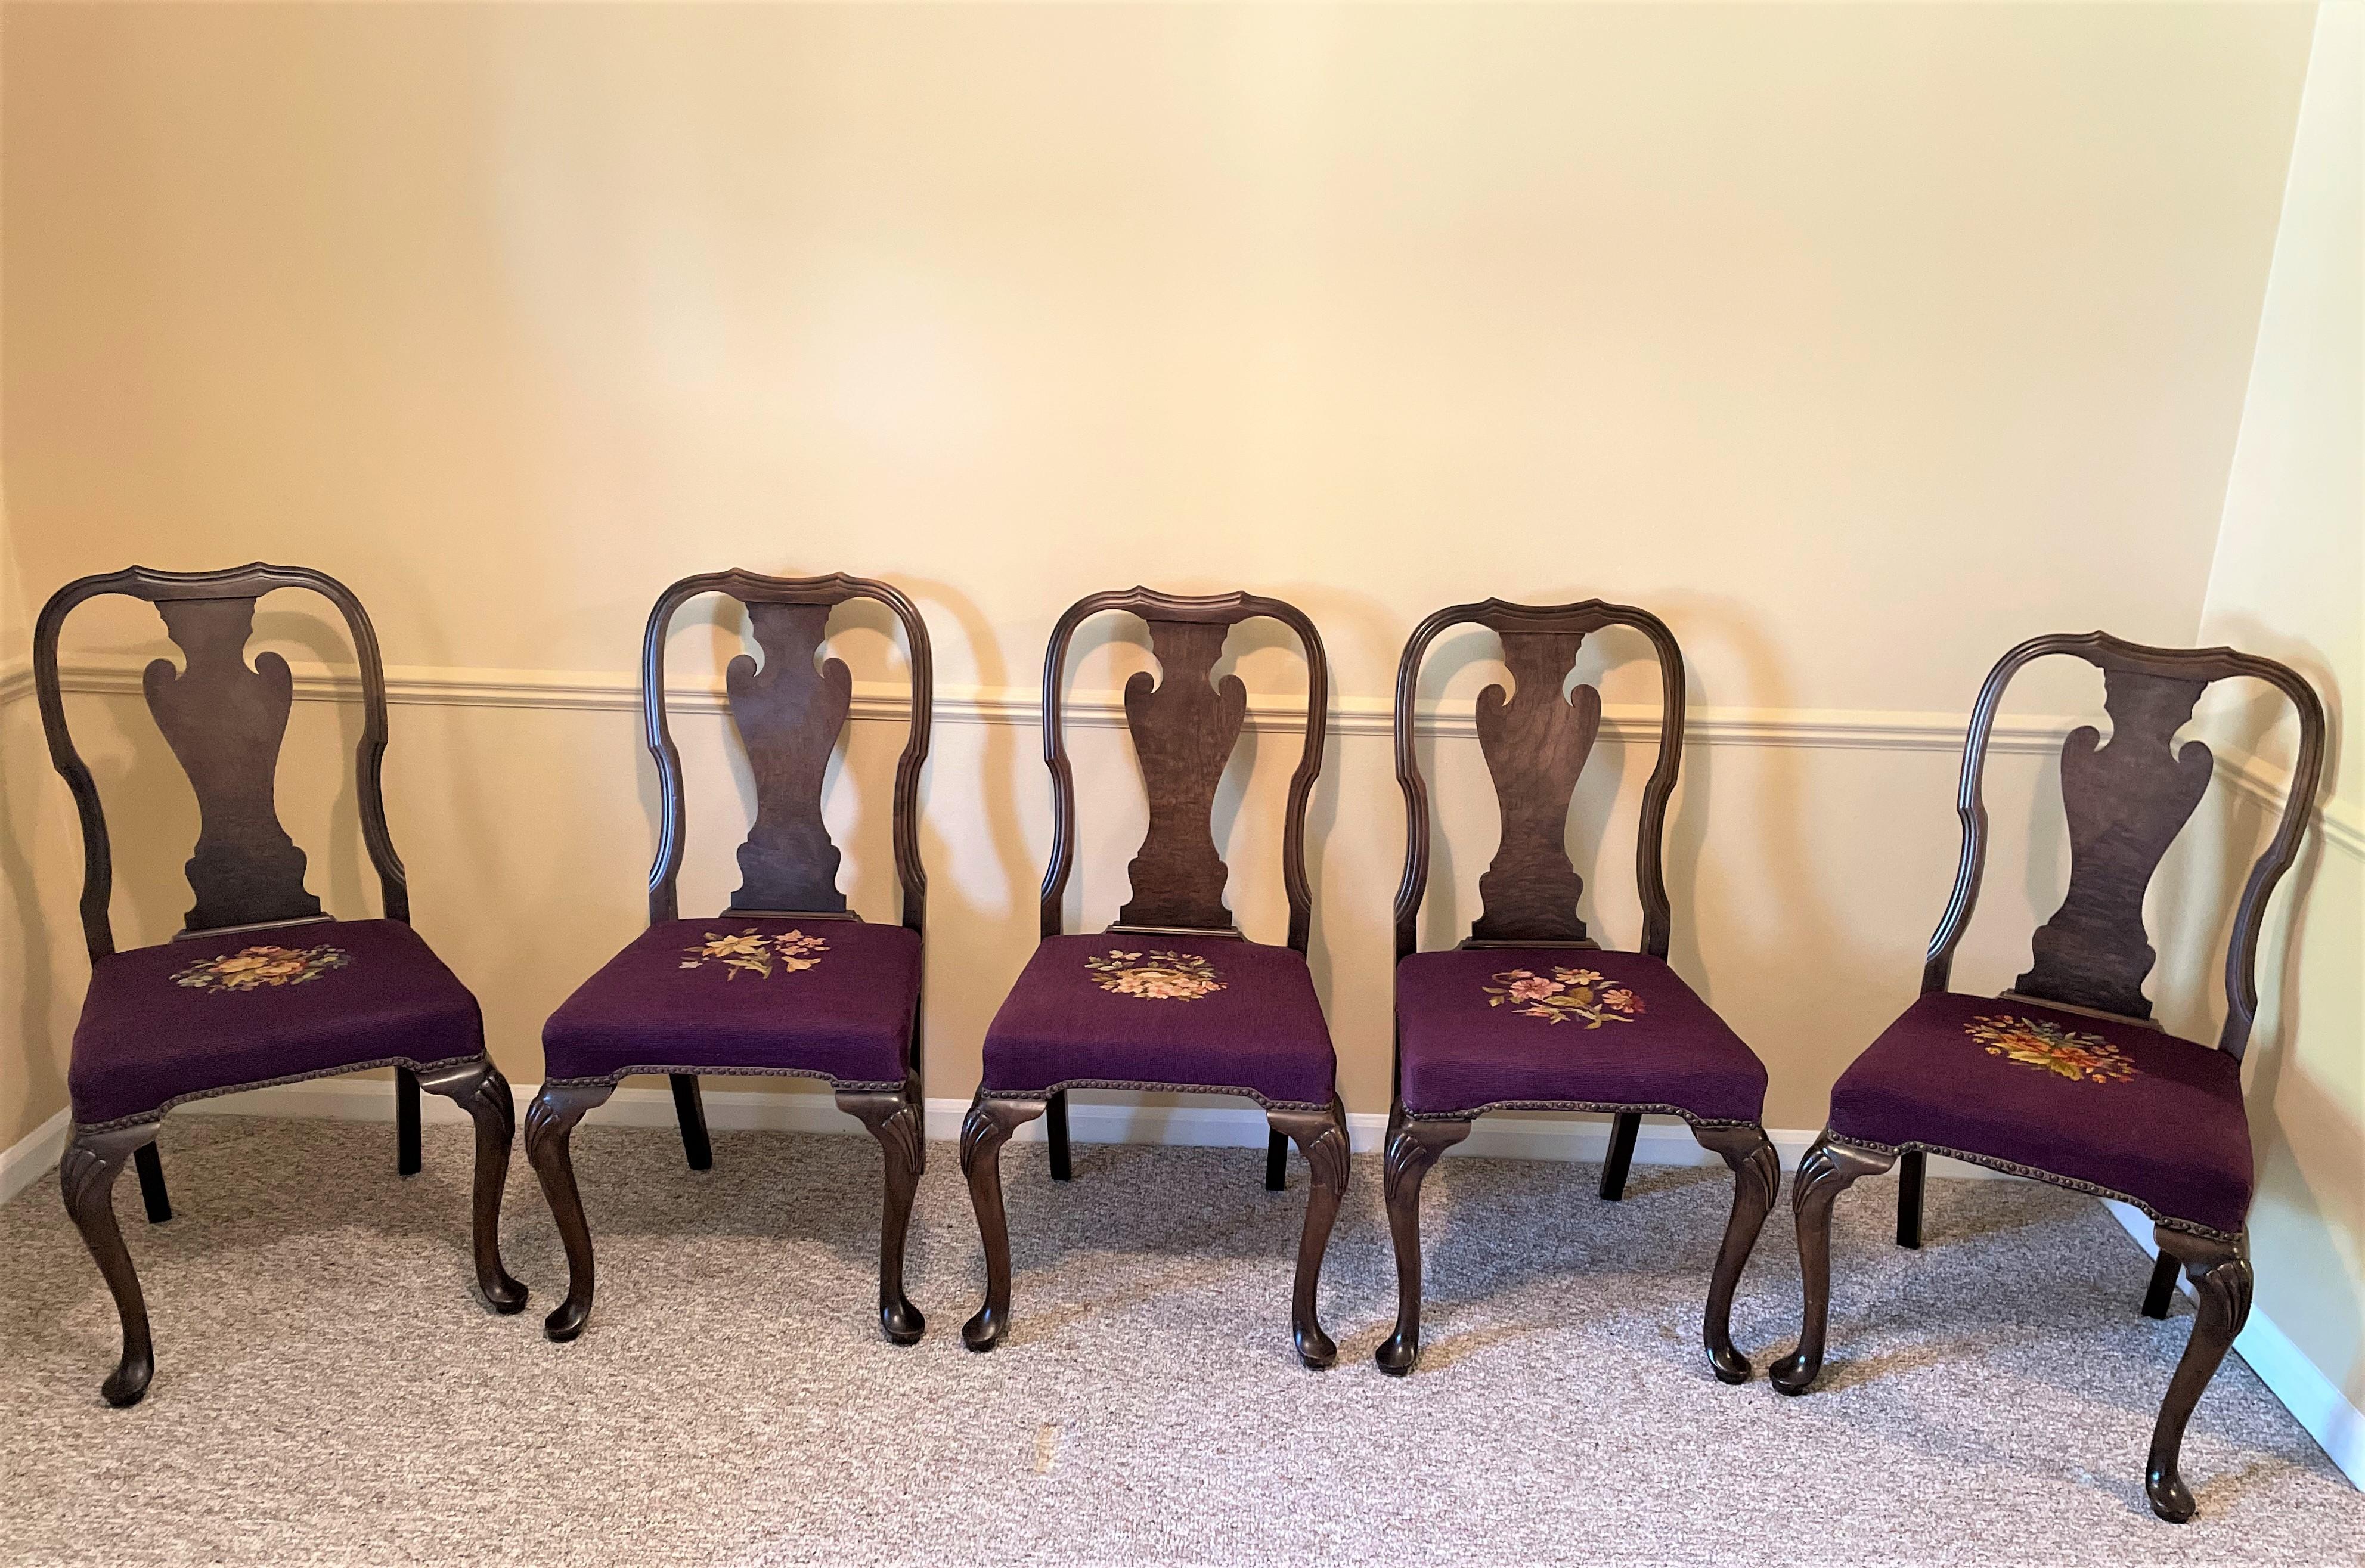 A spectacular set of solid walnut Queen Anne-style dining chairs from the 1930s in MINT condition -- and very well priced! Each chair is well-weighted with generous seat proportions and excellent build quality. 

Each seat cushion is hand-done